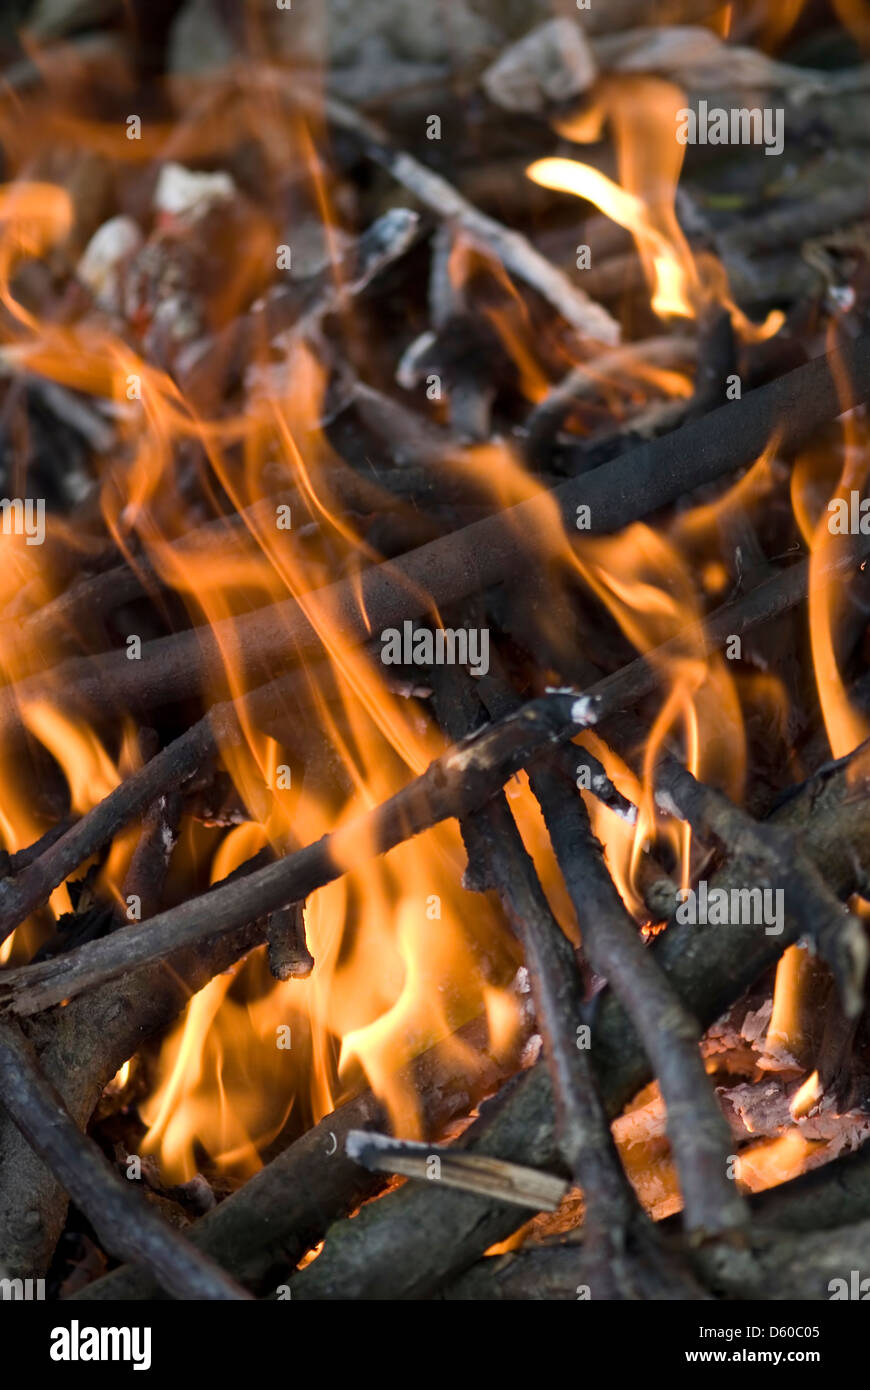 Wood burning on a fire with orange hot flames Stock Photo